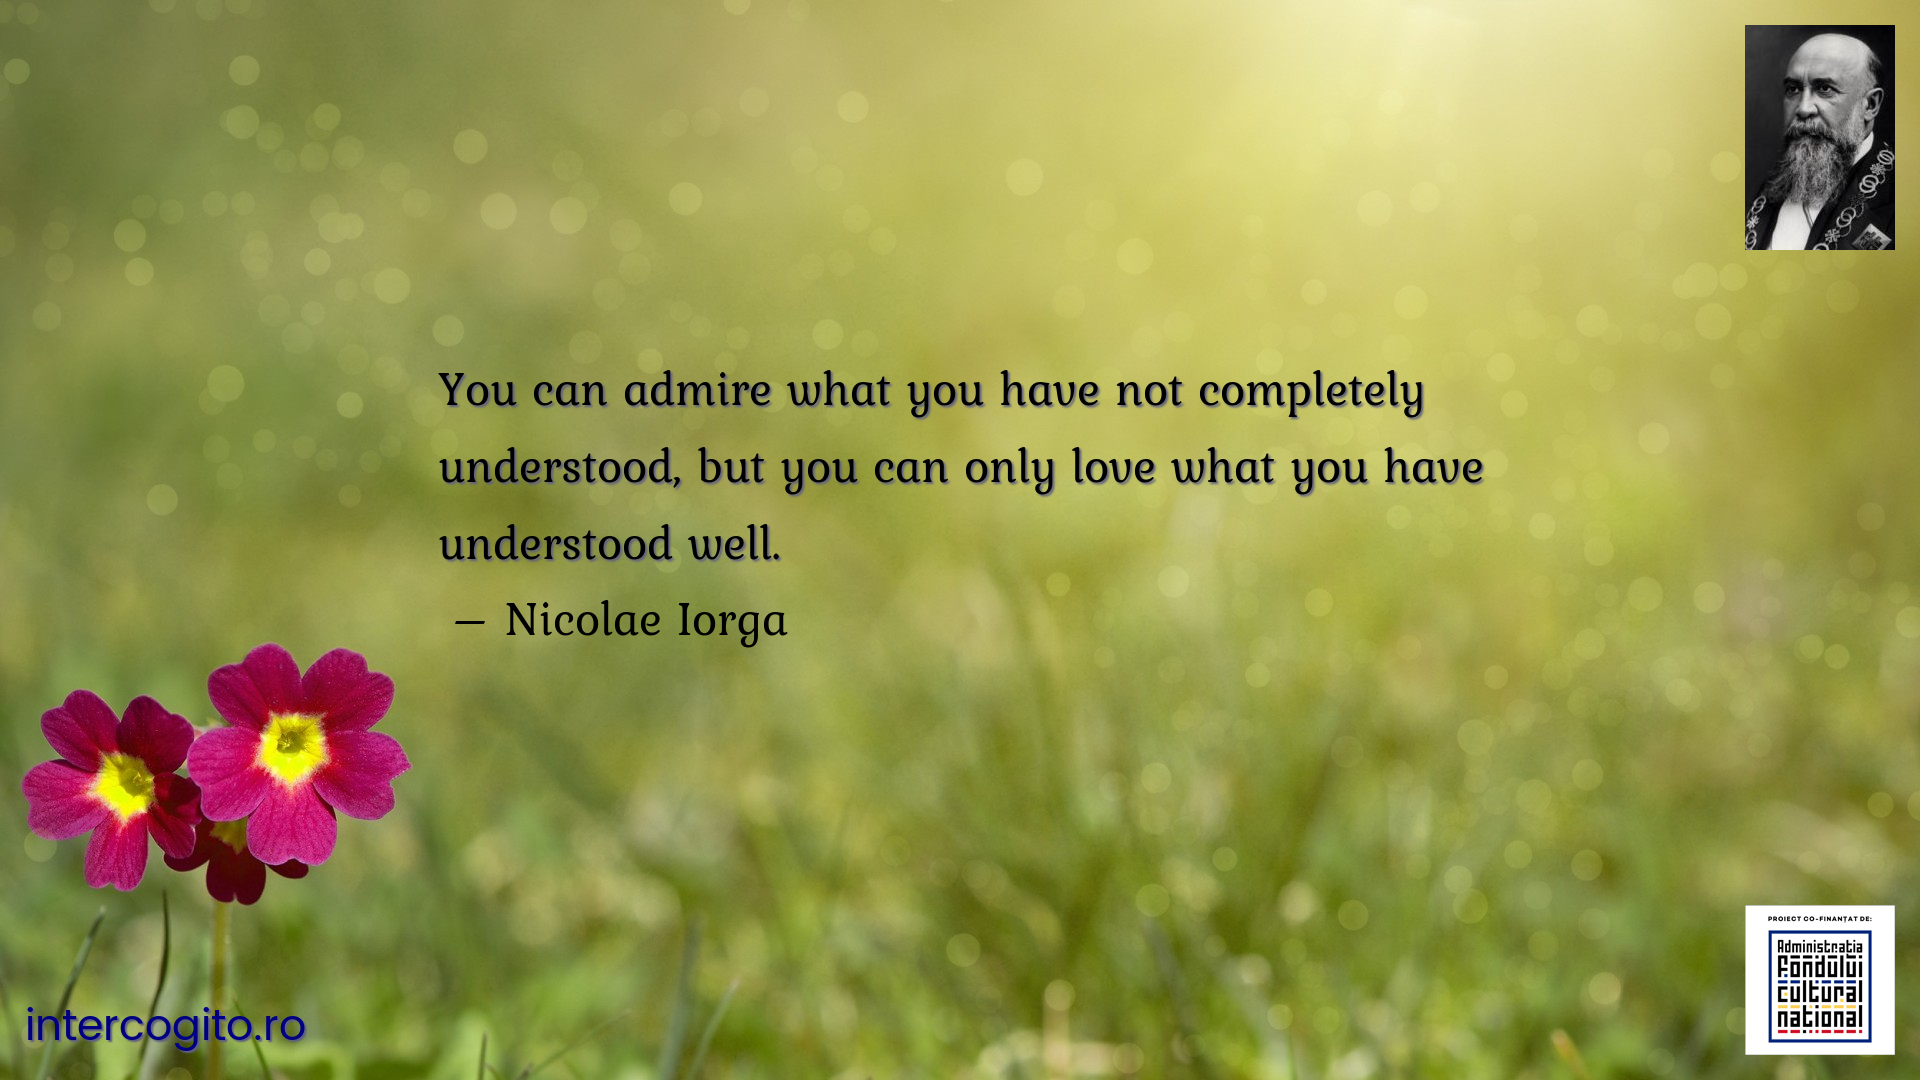 You can admire what you have not completely understood, but you can only love what you have understood well.